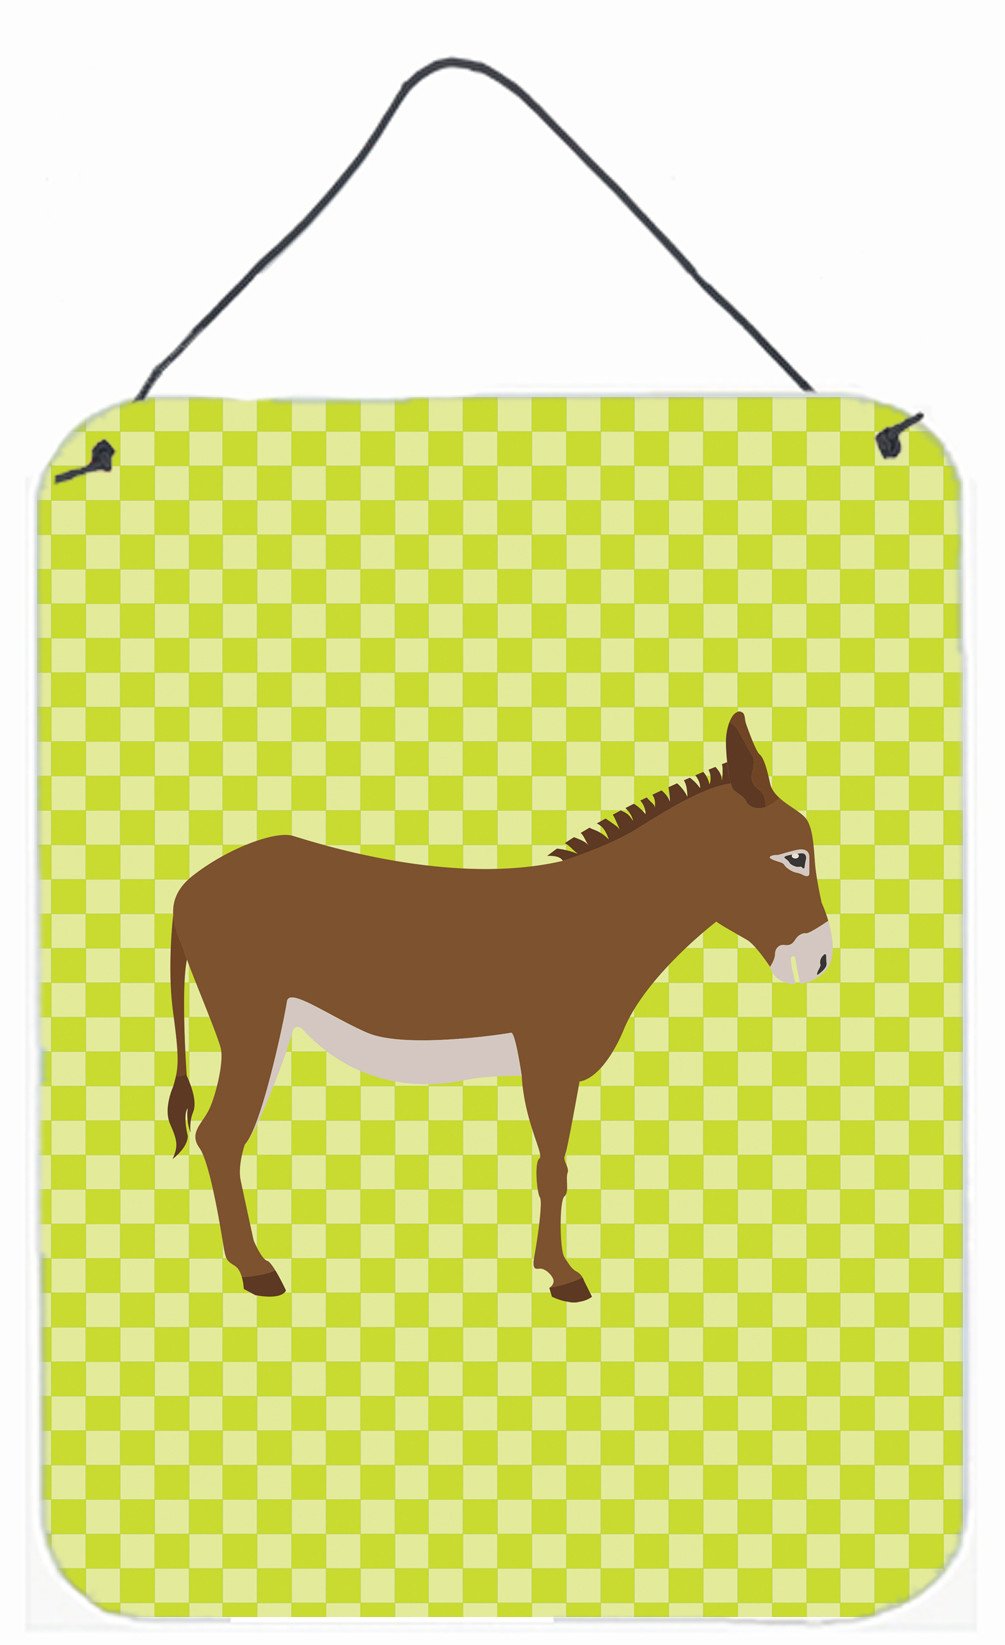 Cotentin Donkey Green Wall or Door Hanging Prints BB7675DS1216 by Caroline's Treasures